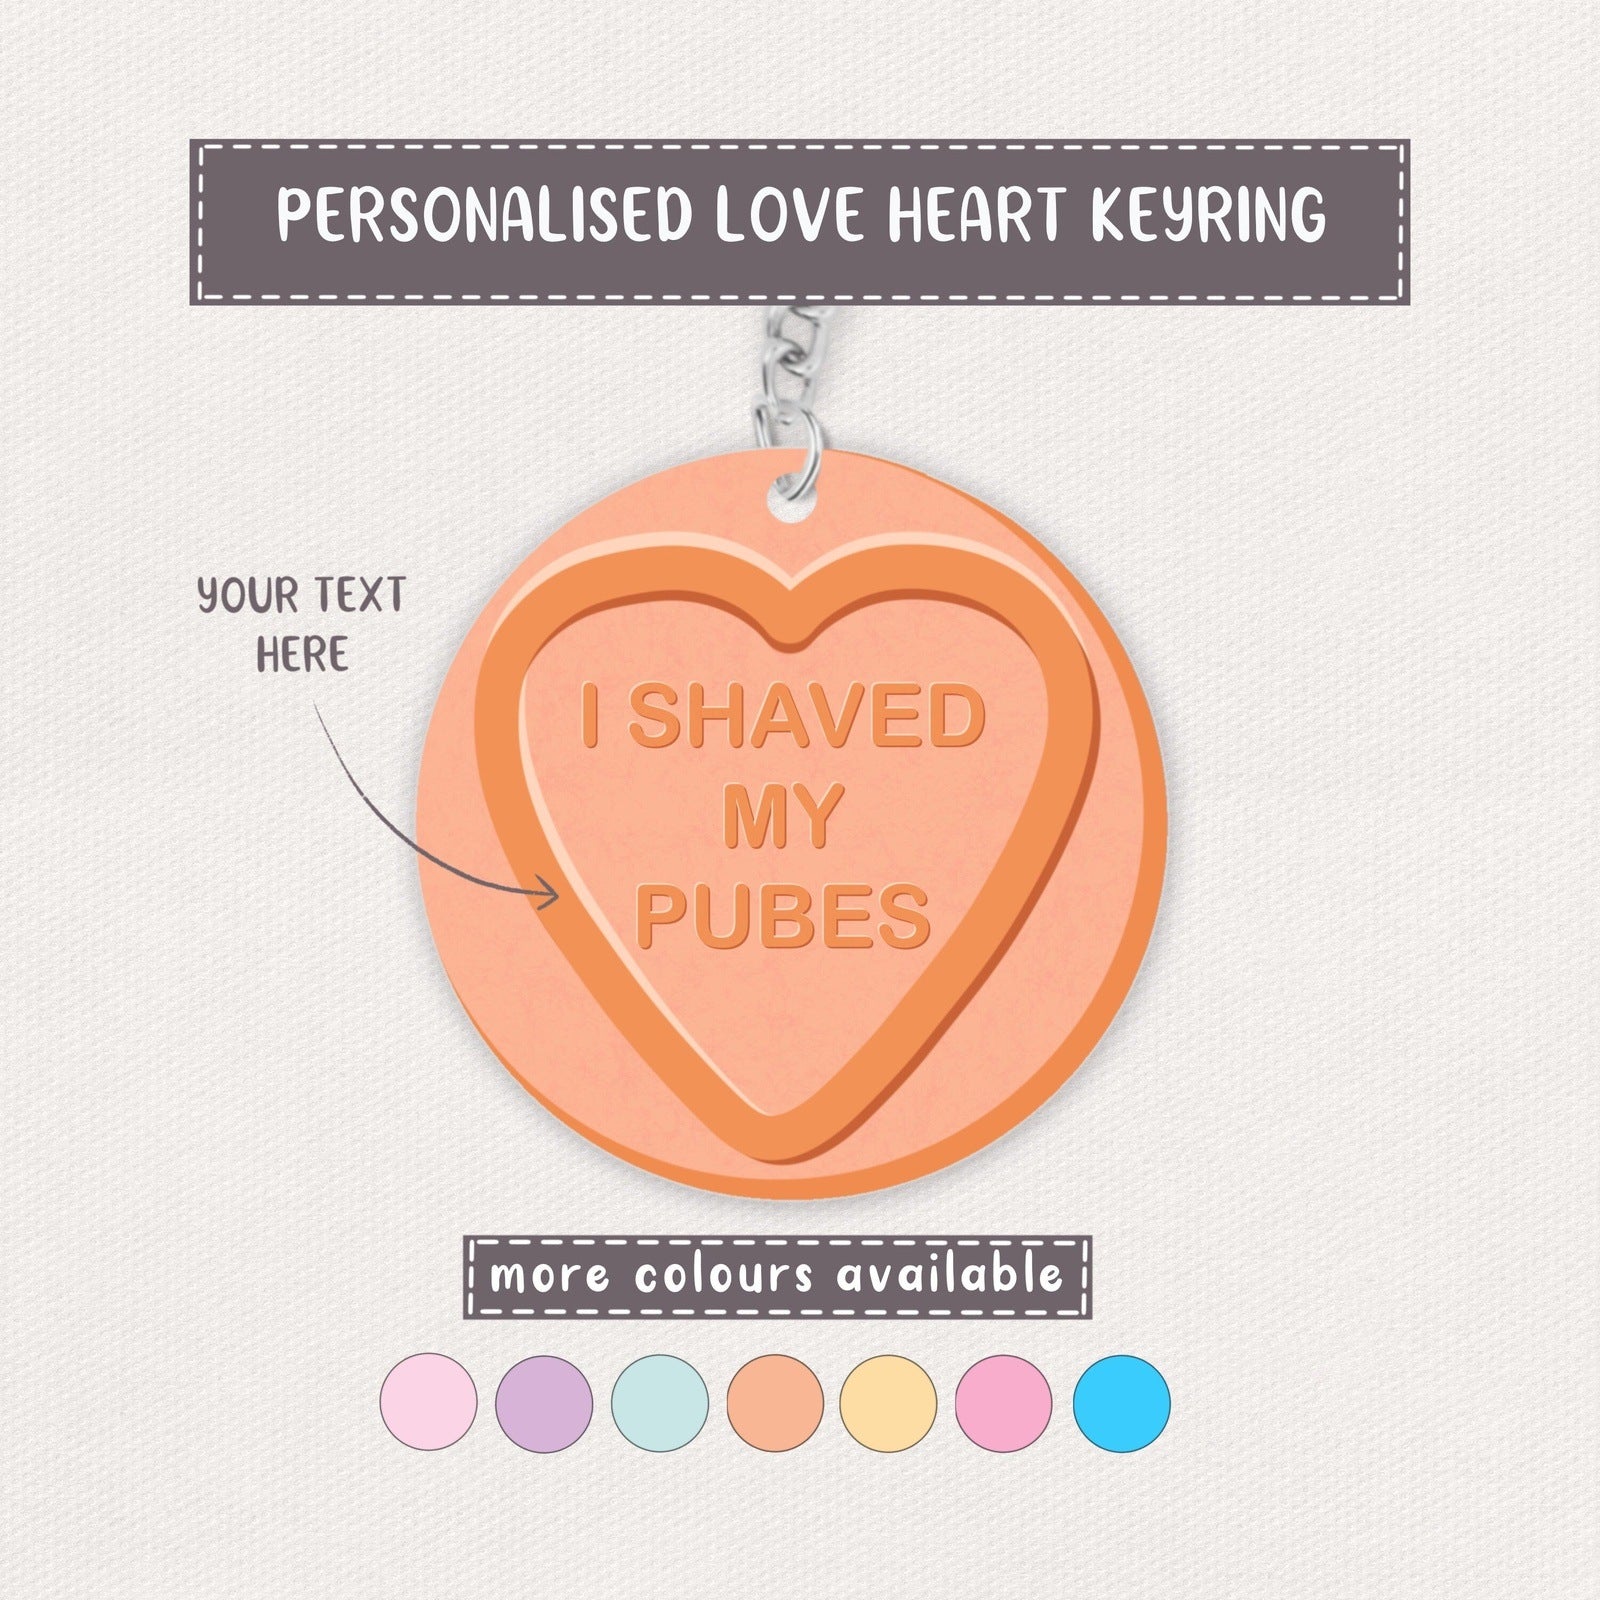 "I Shaved my Pubes" Personalised Love Heart Keyring